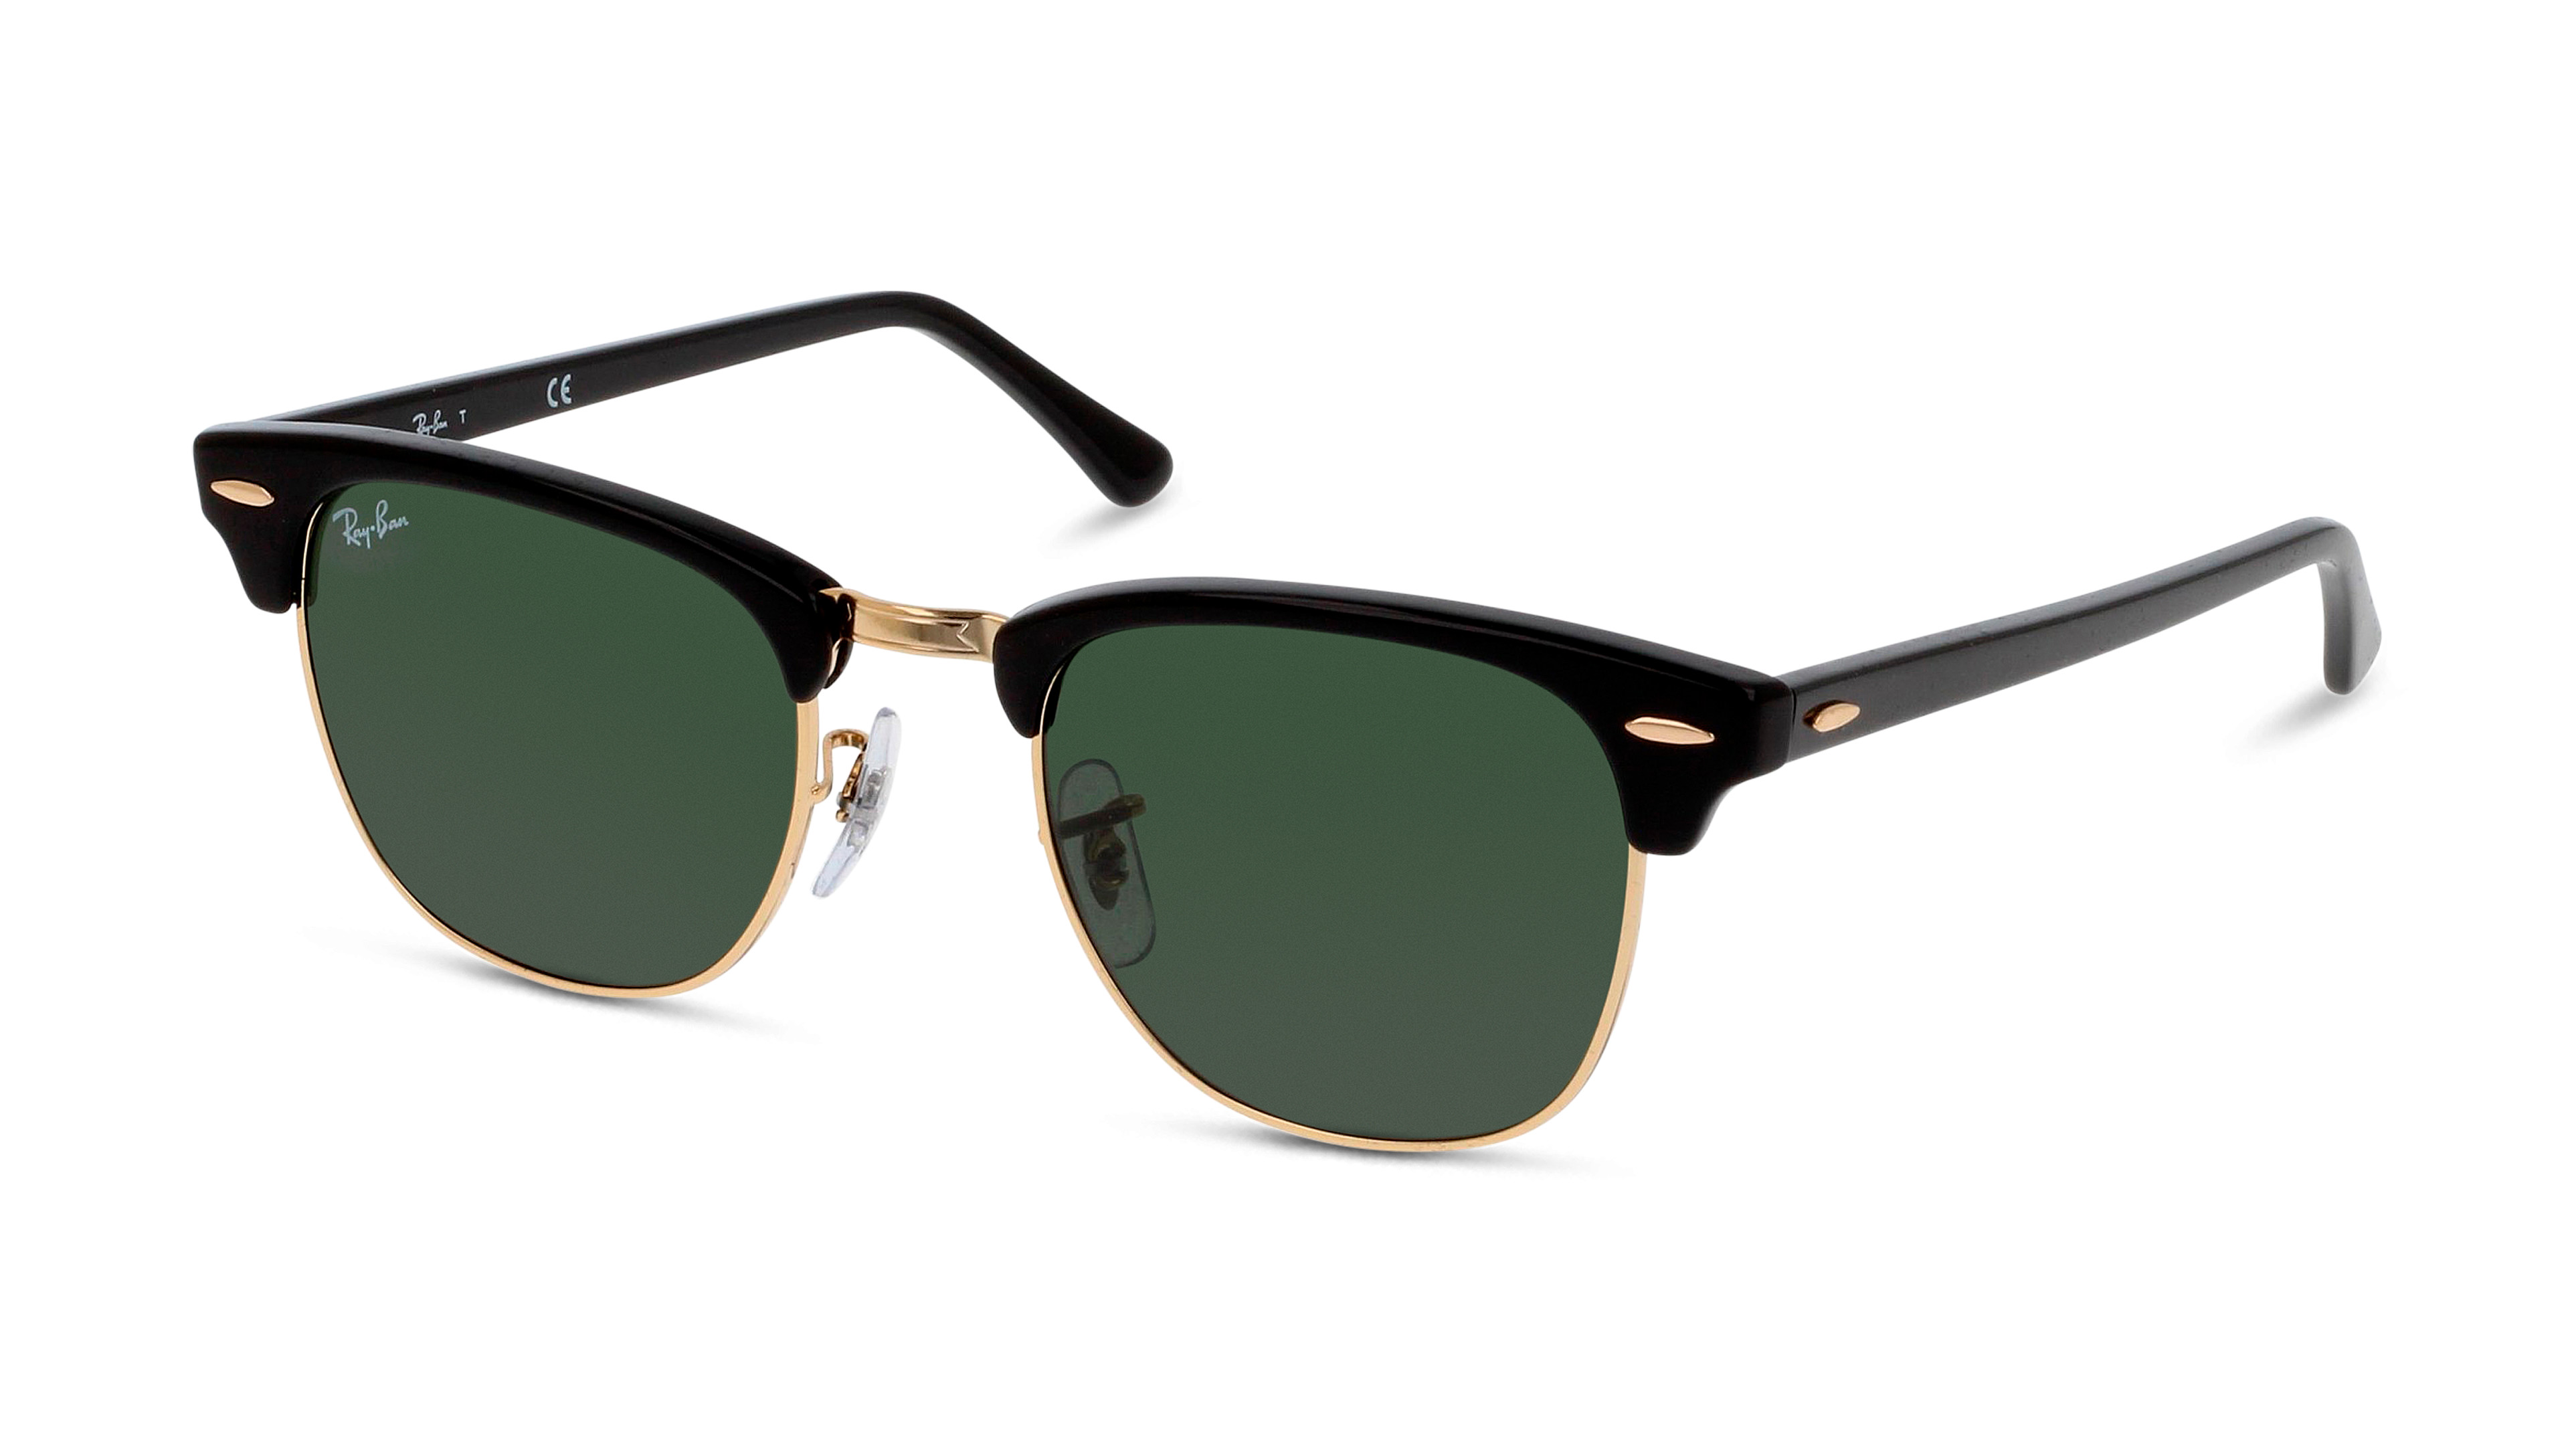 [products.image.angle_left01] Ray-Ban Clubmaster 0RB3016 W0365 Sonnenbrille